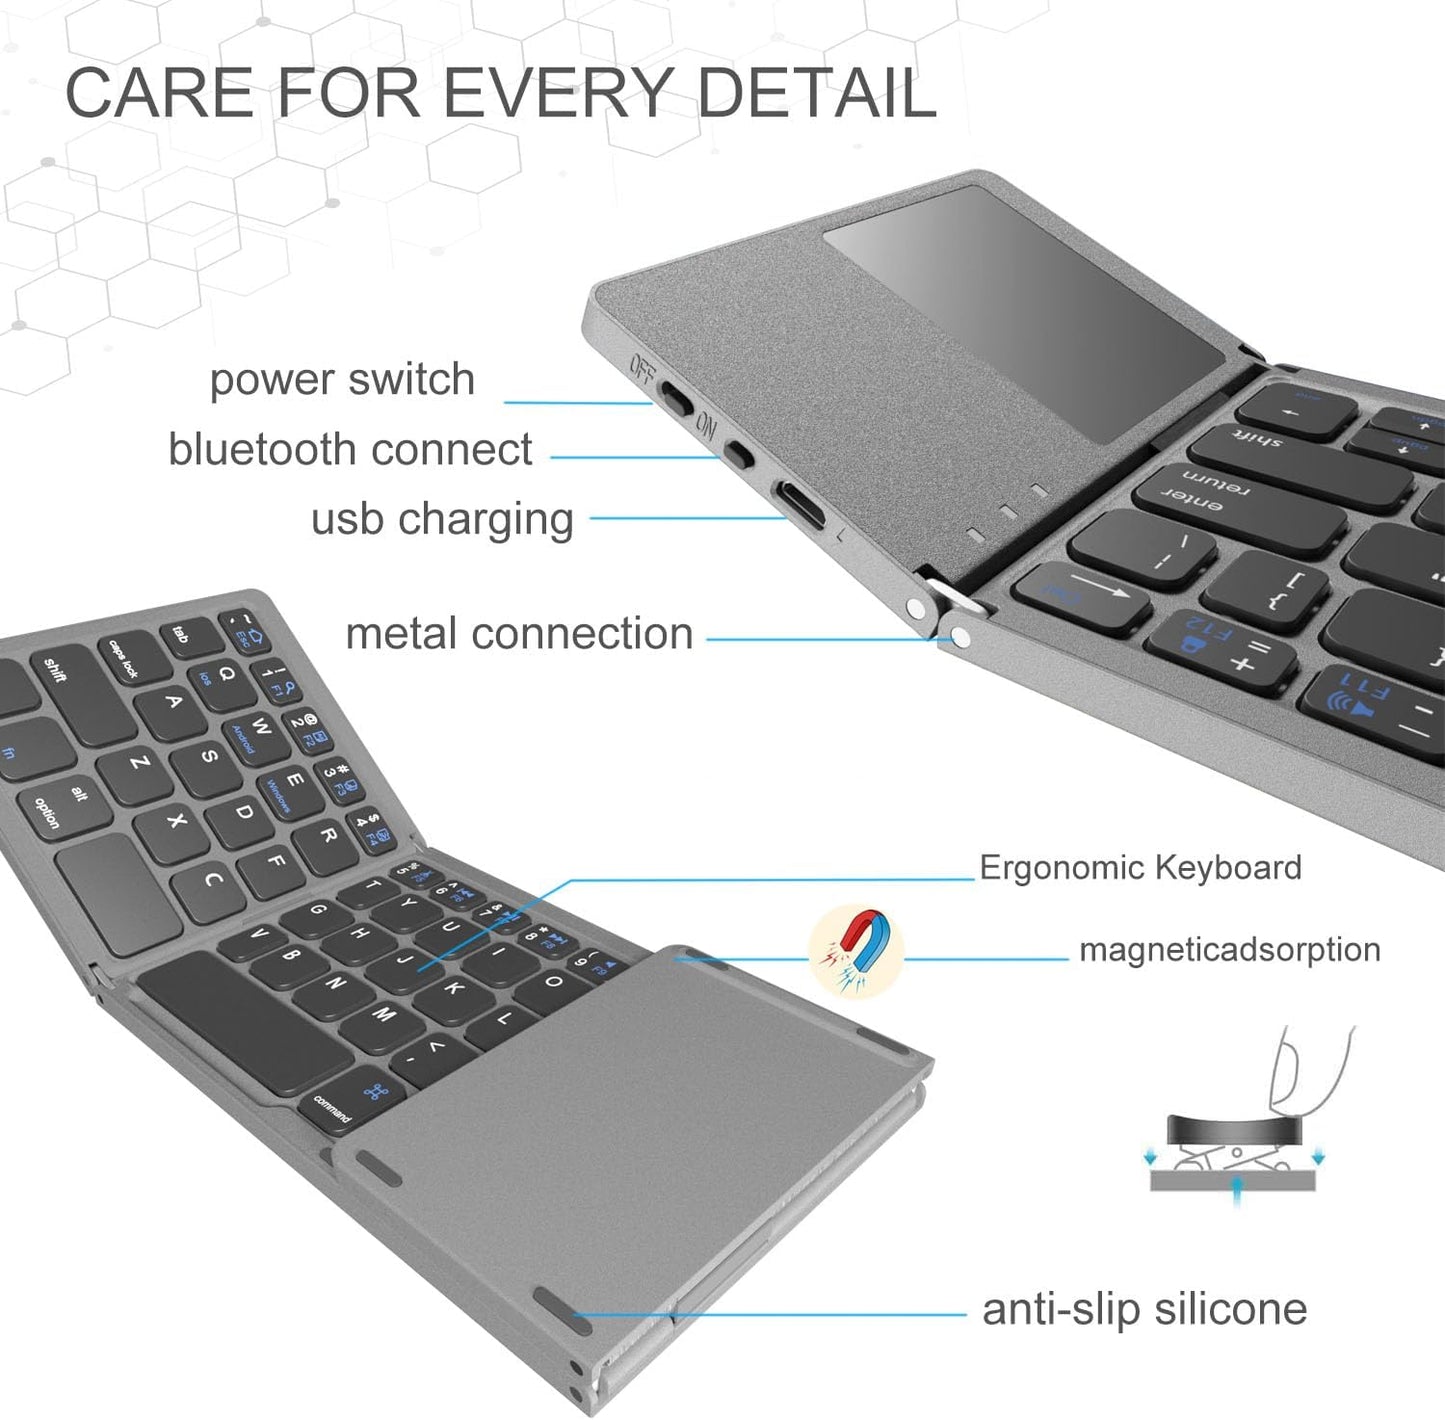 POPULAR Foldable Bluetooth Keyboard, Pocket Size Portable Mini BT Wireless Keyboard with Touchpad for Android, Windows, PC, Tablet, with Rechargeable Li-ion Battery-Dark Gray